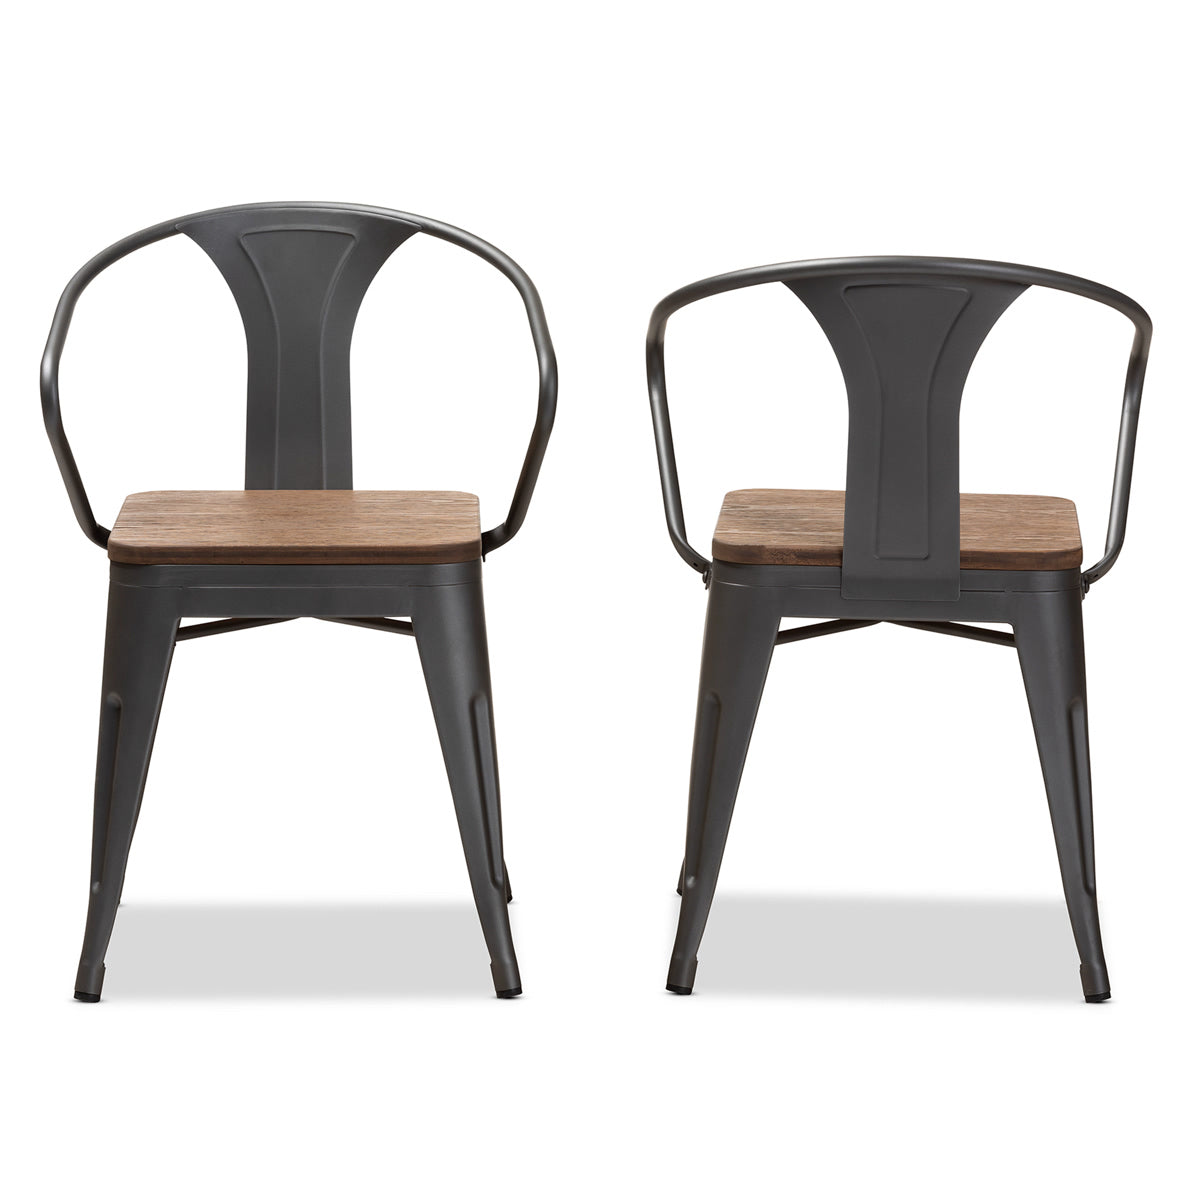 Baxton Studio Henri Vintage Rustic Industrial Style Tolix-Inspired Bamboo and Steel Stackable Side Chair Set of 2 Baxton Studio-dining chair-Minimal And Modern - 2